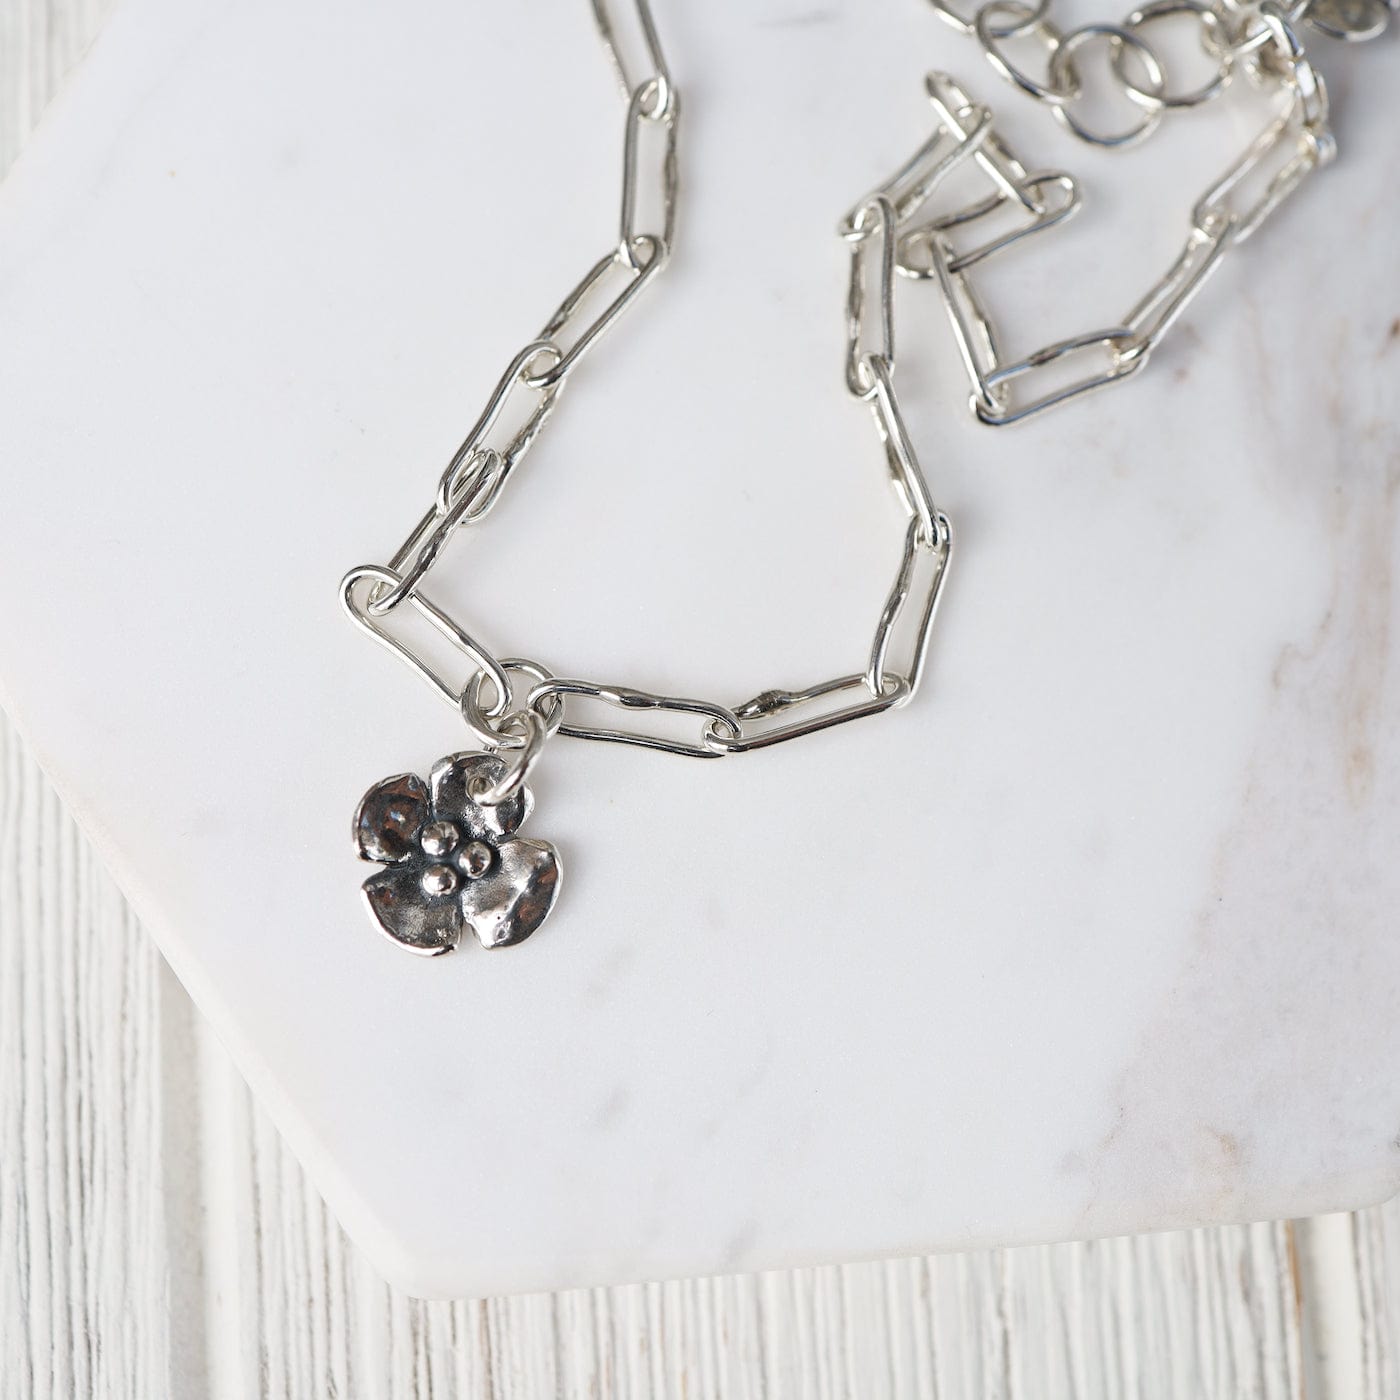 ANK Small Dogwood Charm Anklet